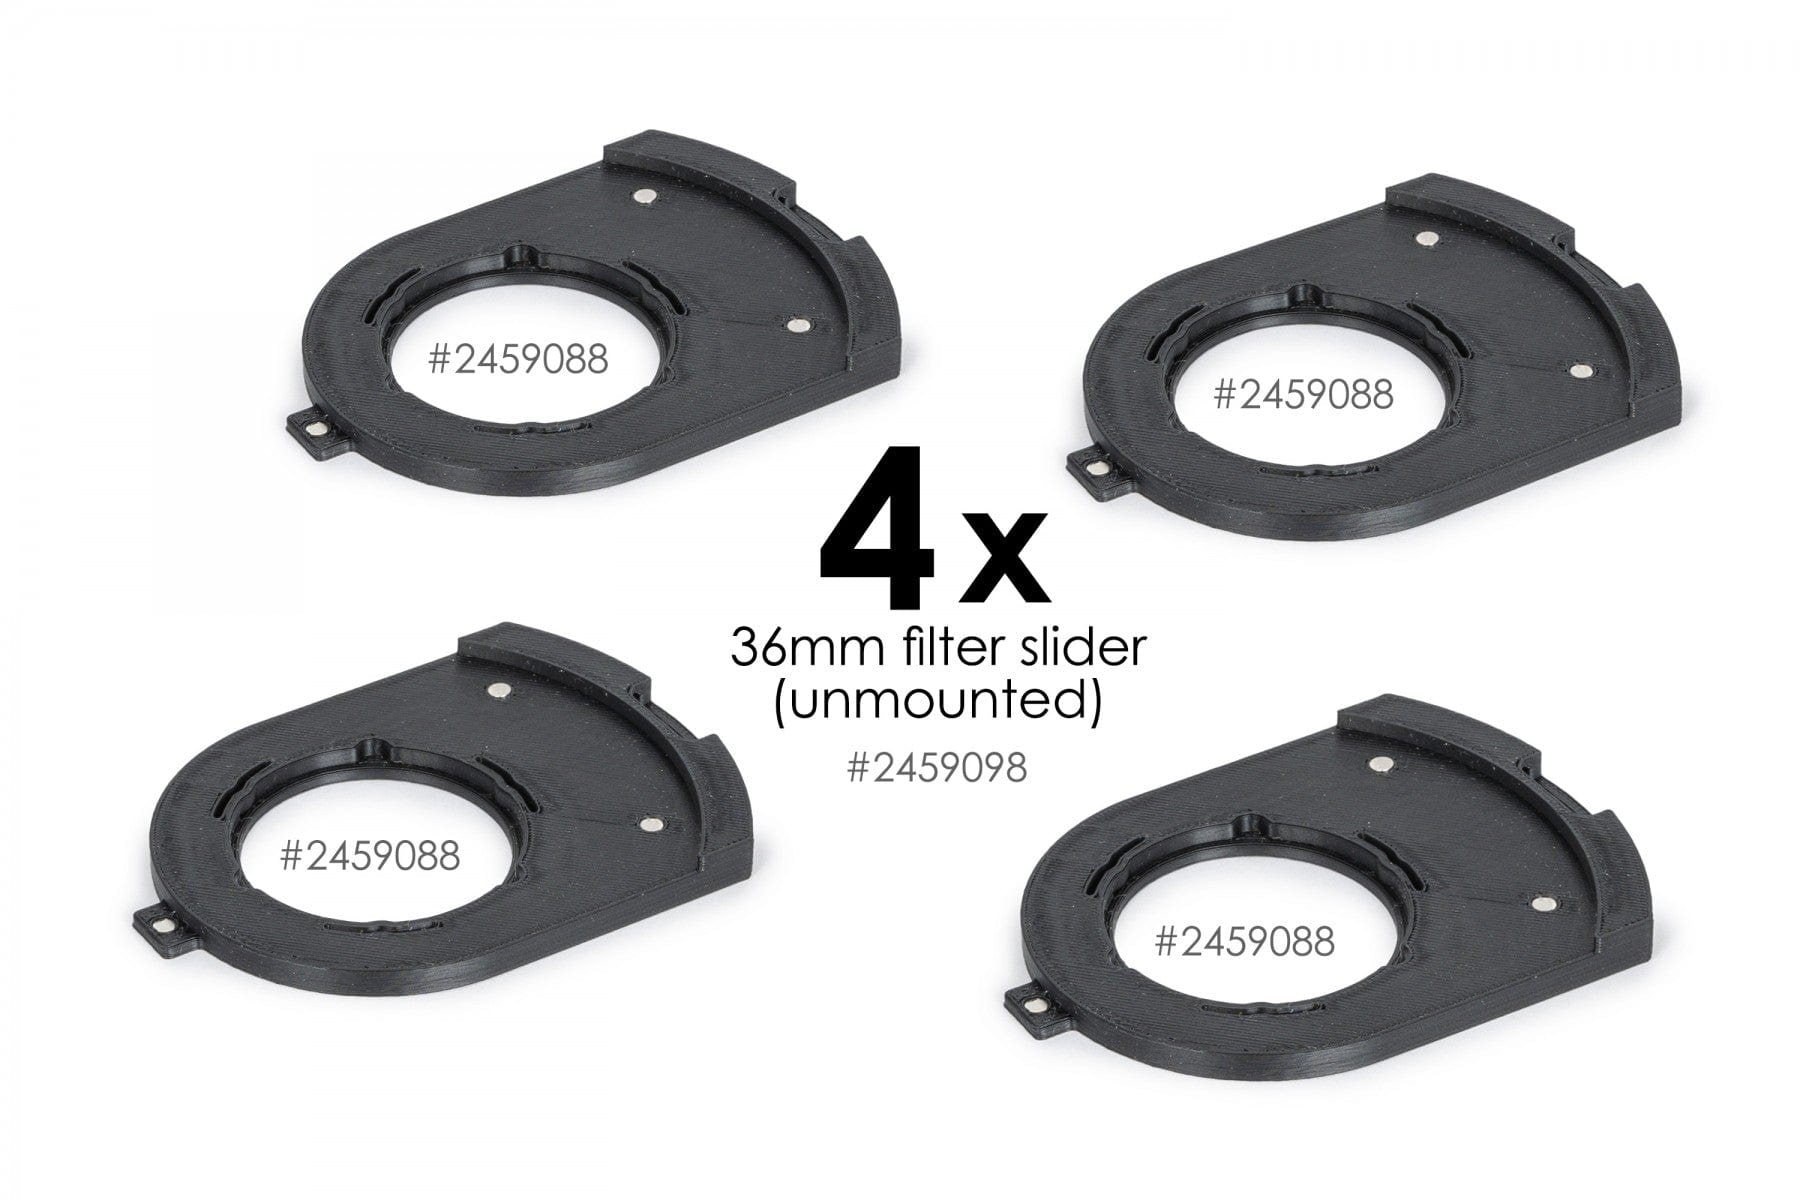 Baader Planetarium Accessory 4x Filterholder 36mm for FCCT (3D-printed) for unmounted Ø 36x2mm Baader Filter